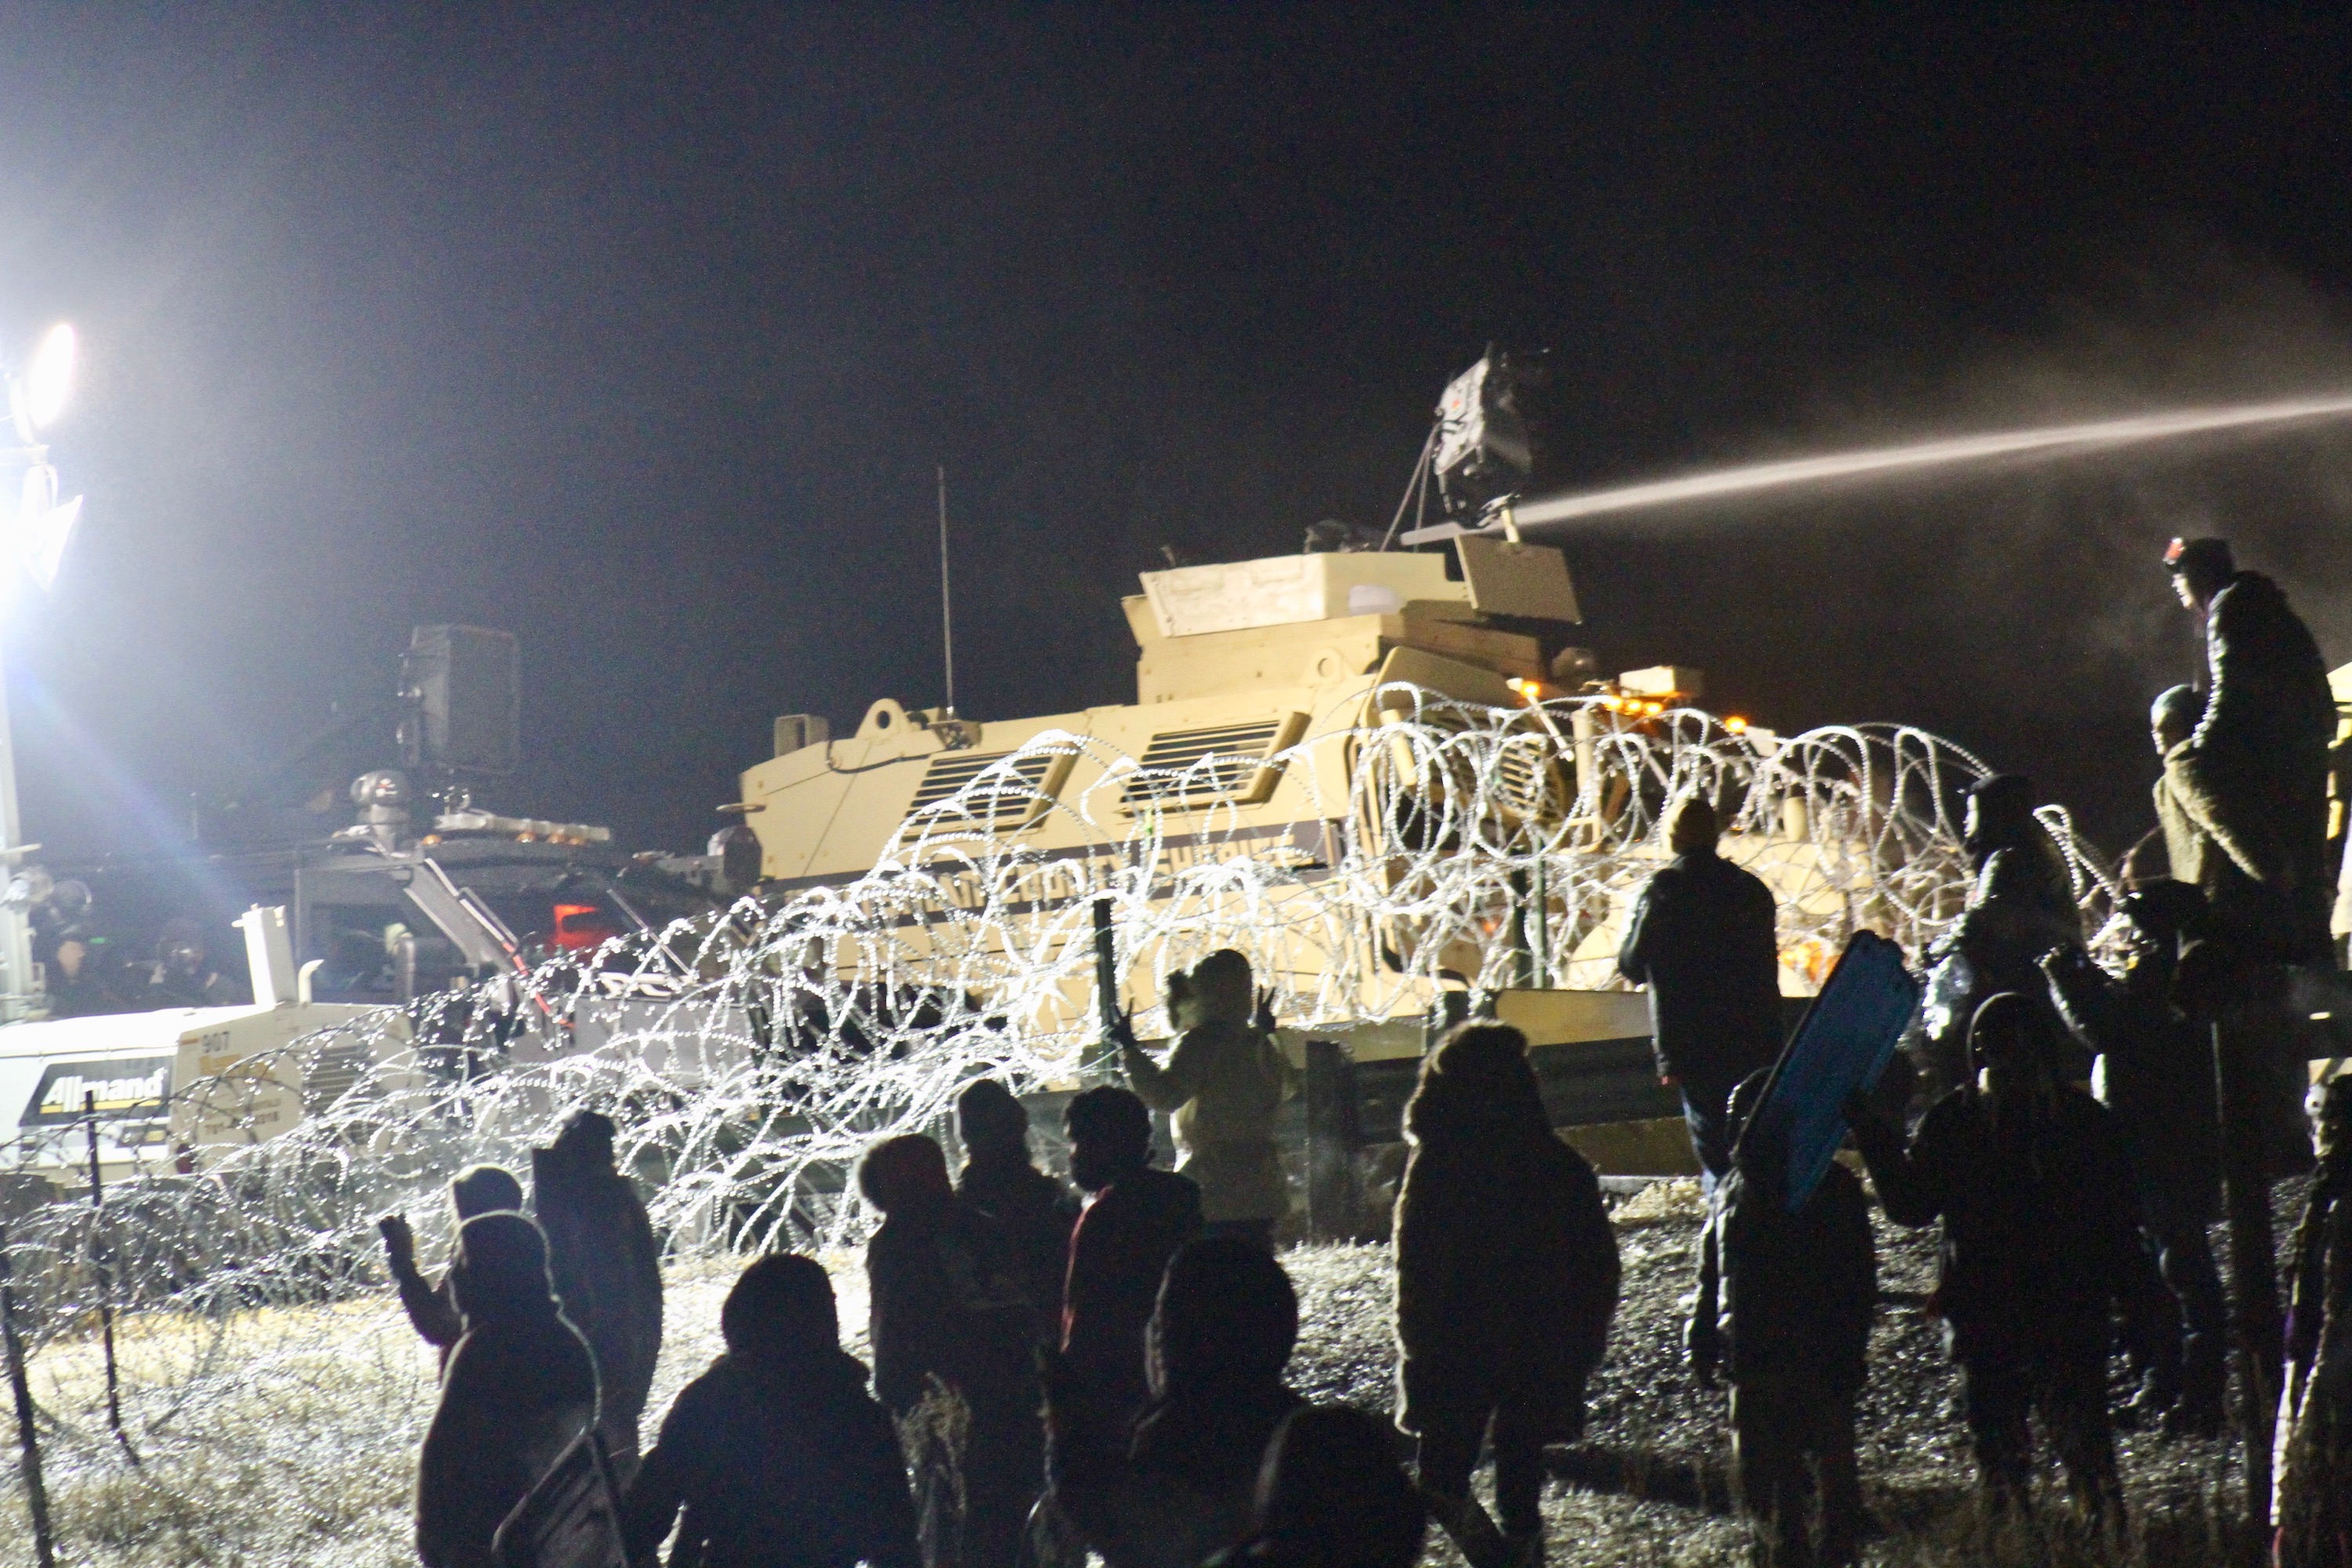 North Dakota secures $10 million in federal funds to pay for #NoDAPL response